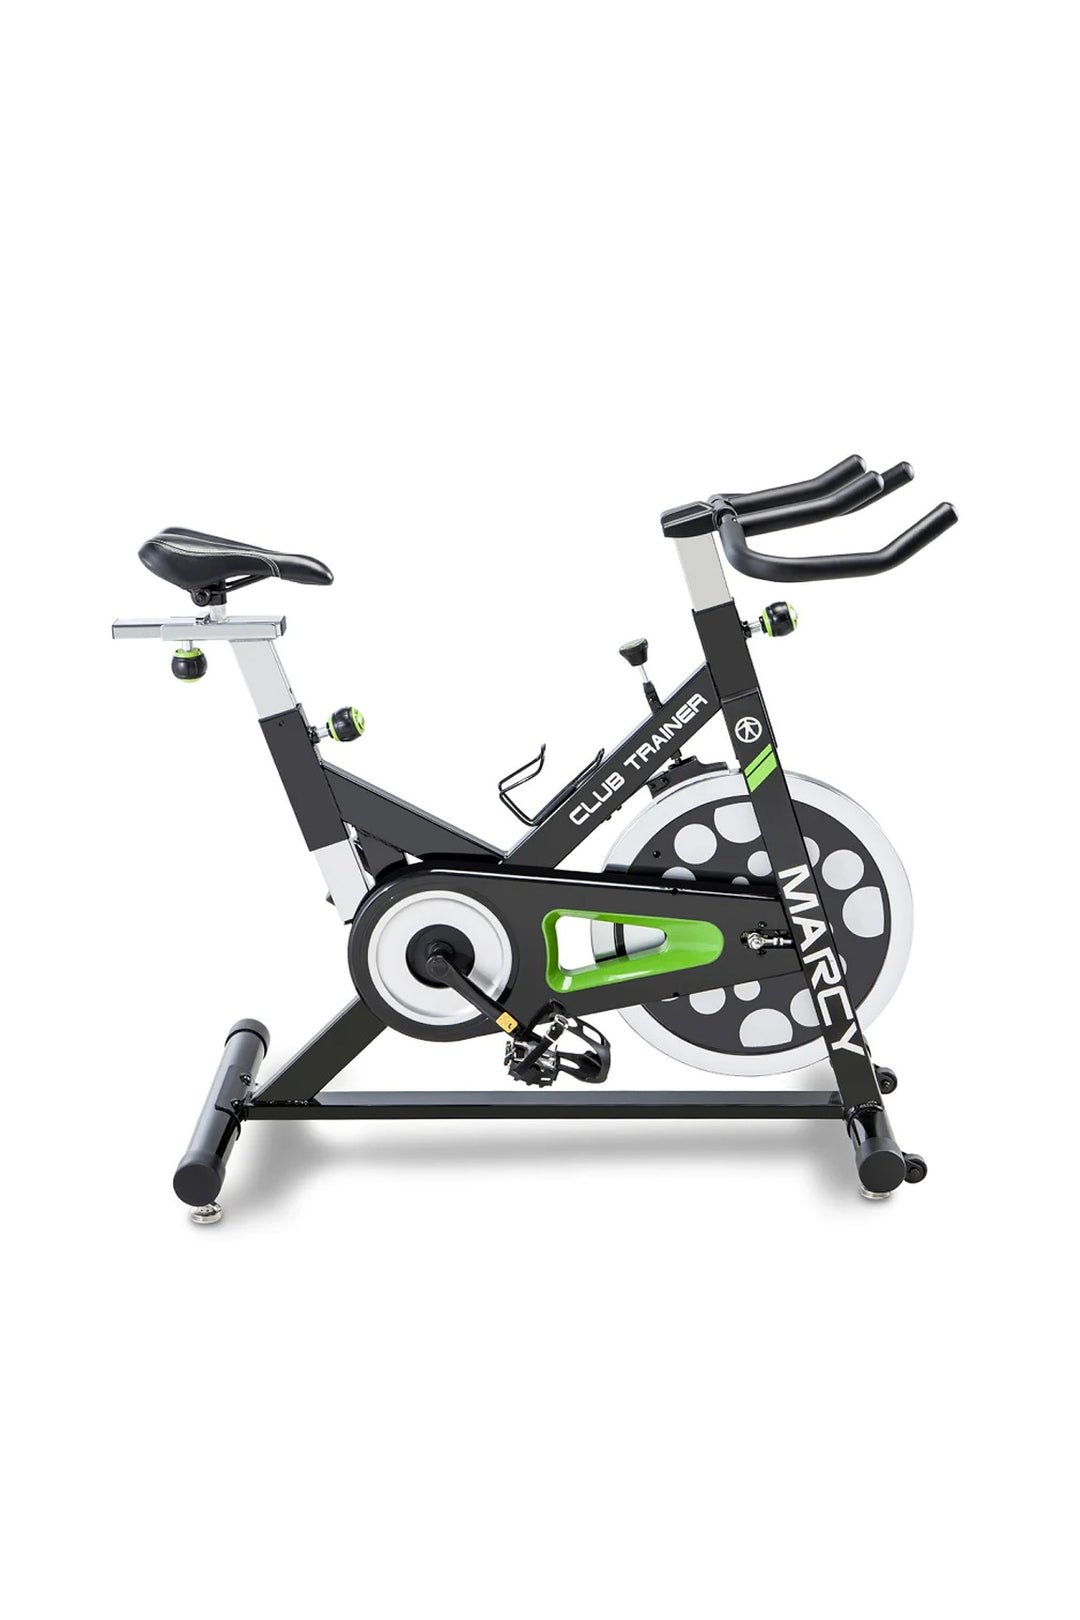 Marcy Club Trainer Spin Bike